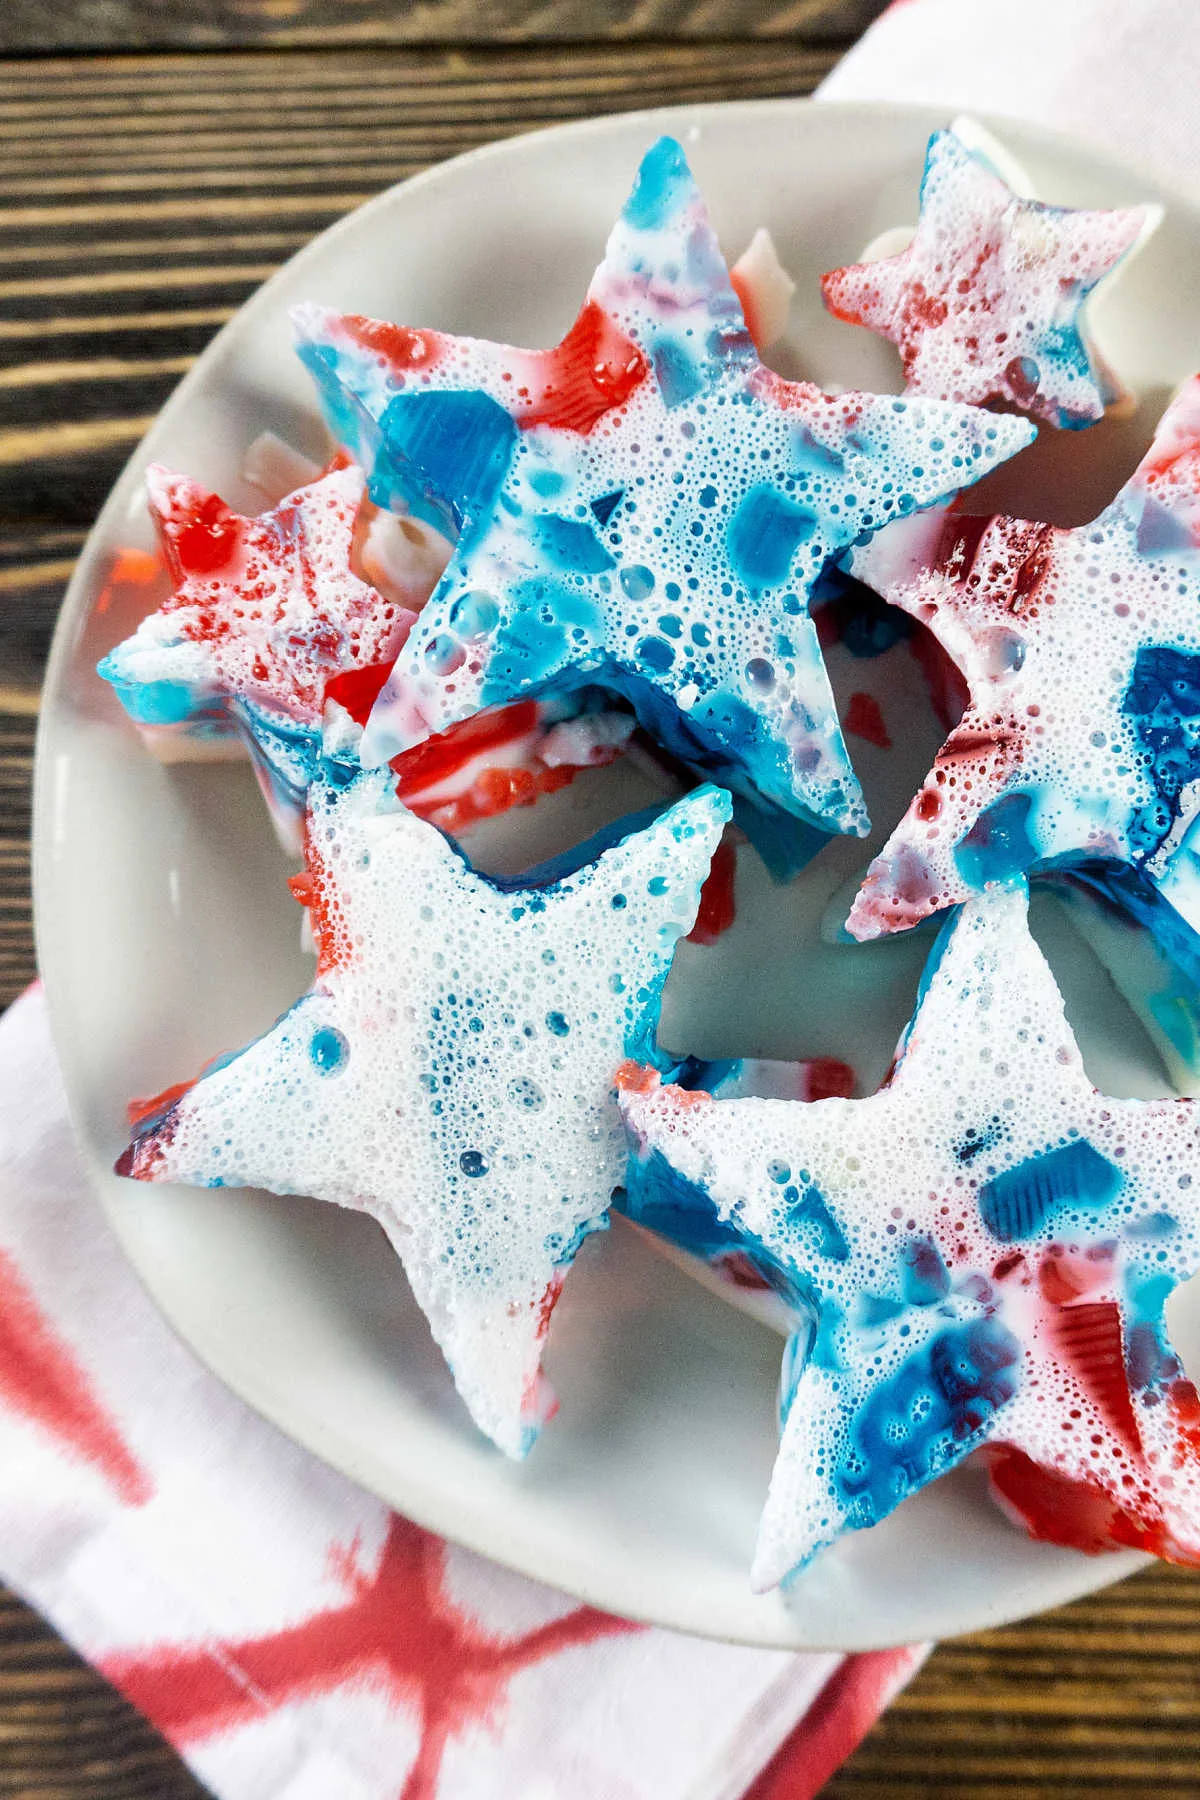 Plate of red white and blue broken glass jello cut into star shapes.